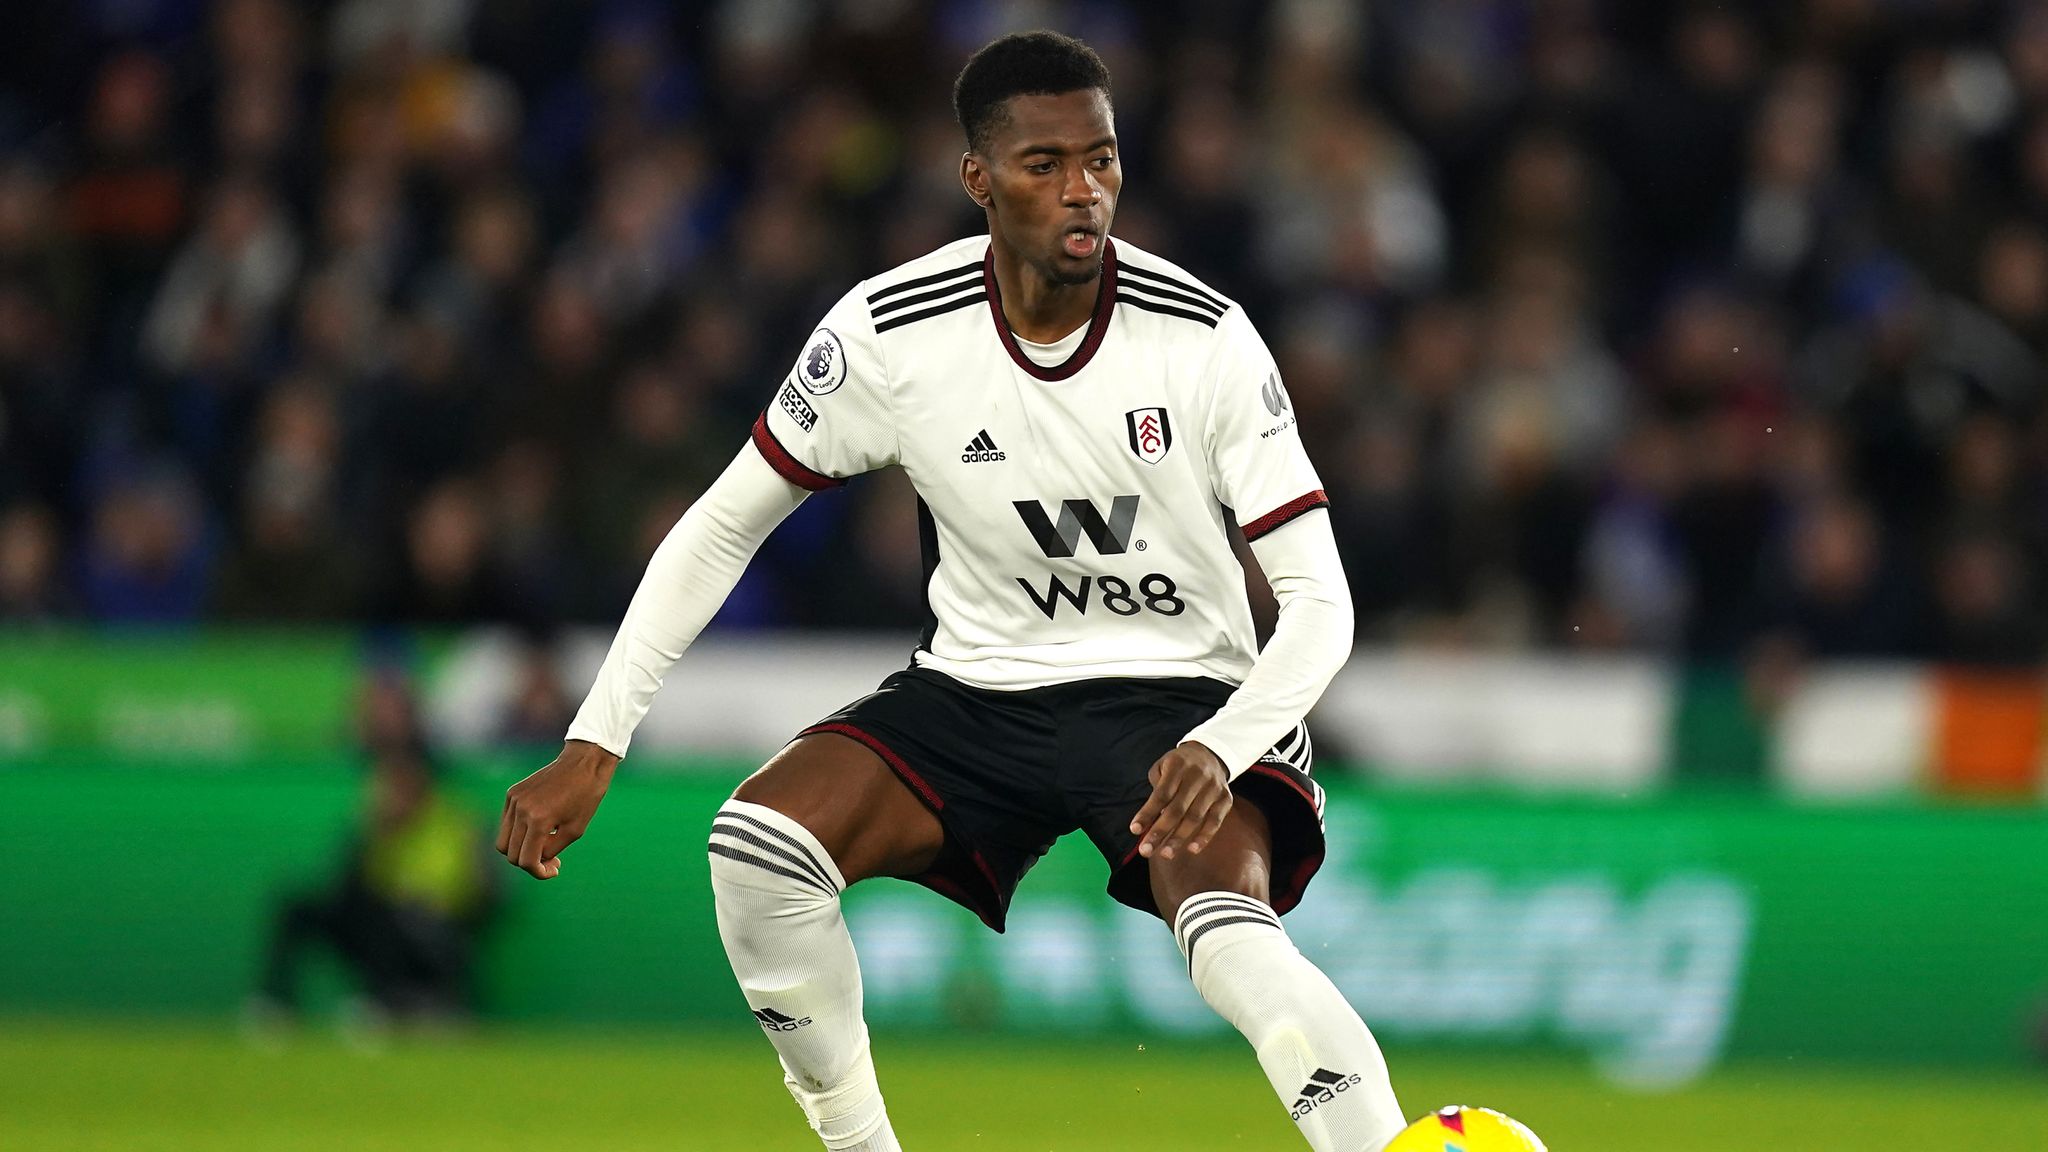 Transfer rumors: Tosin Adarabioyo could Join West Ham on a free summer transfer